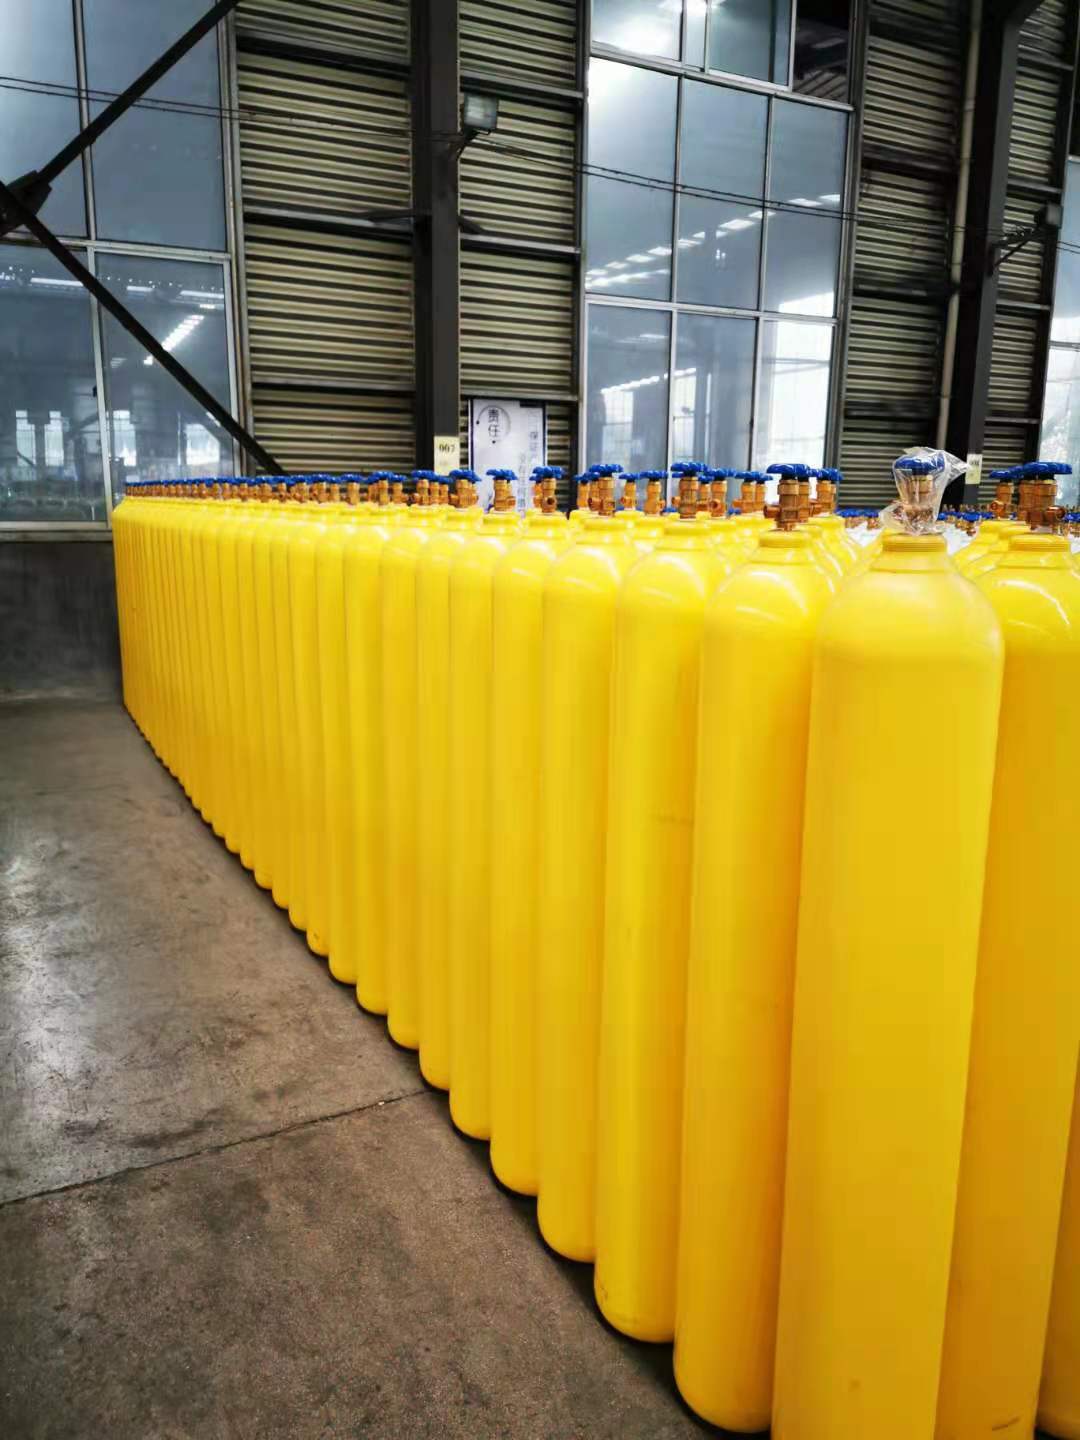 60L 150bar 6.2mm ISO9809 TPED High Pressure Vessel Seamless Steel Chlorine Gas Cylinder